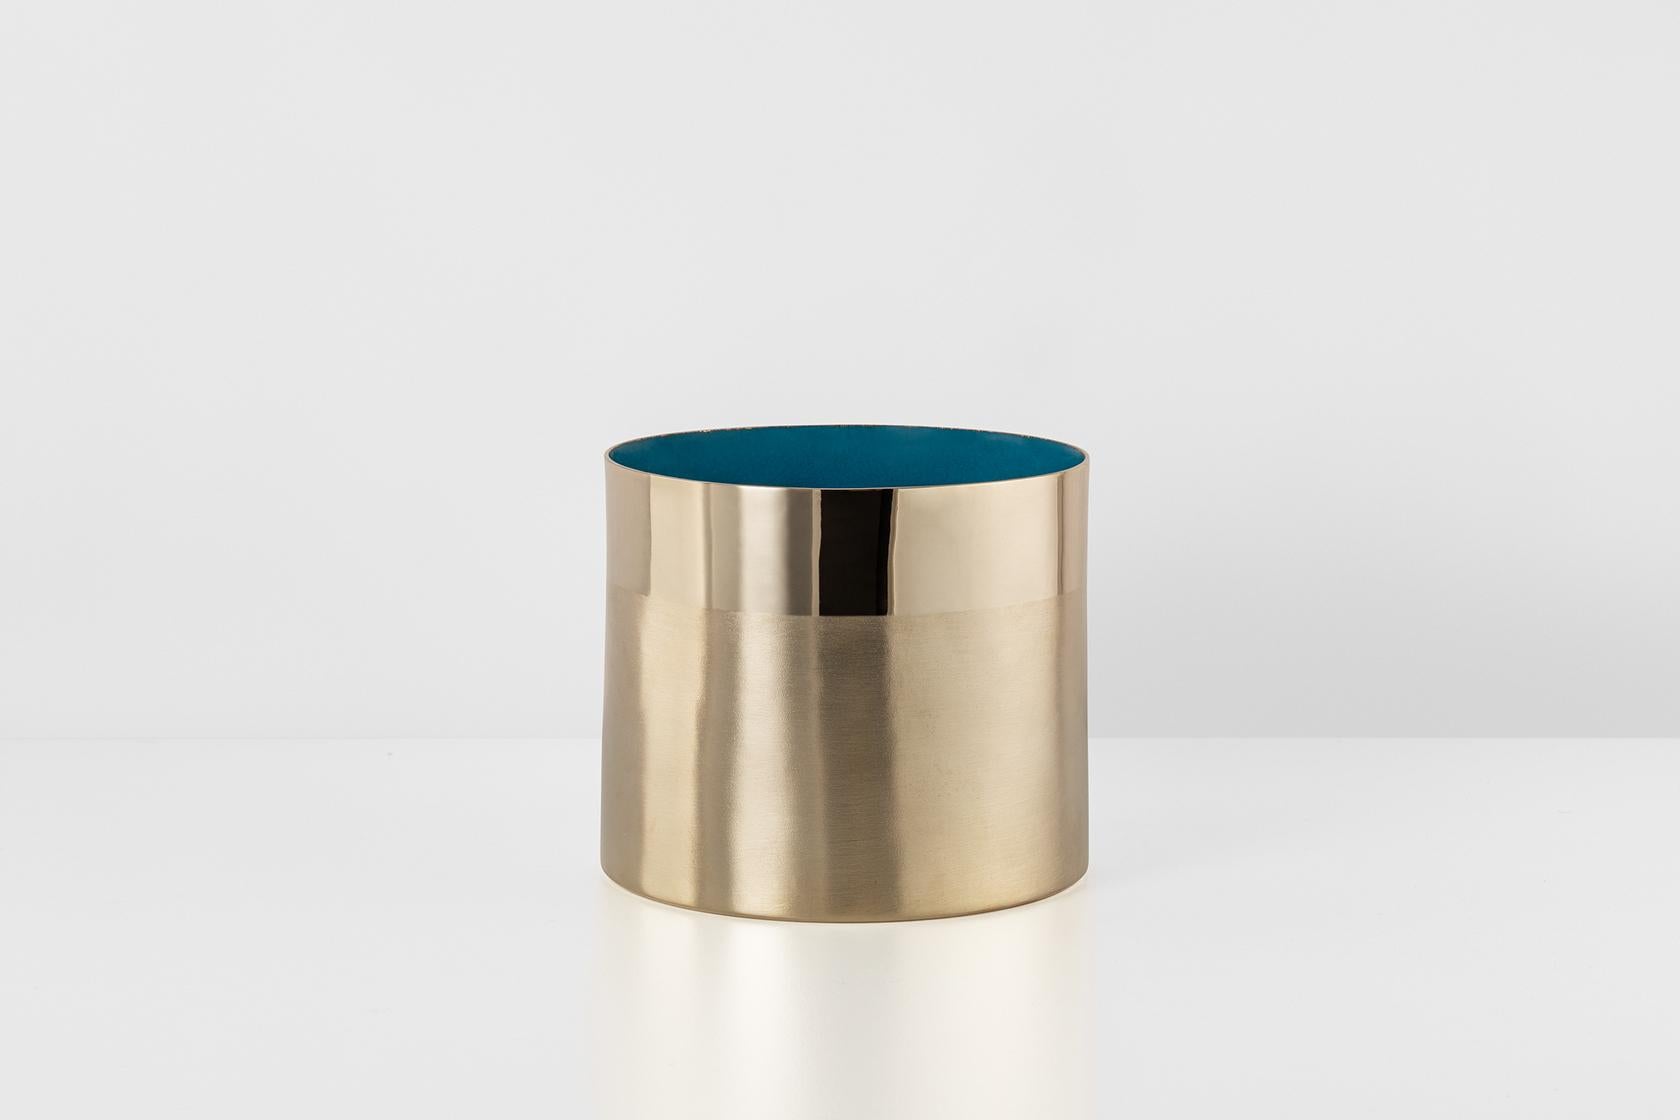 Novae, Copper Vase with an Enamelled Interior and Galvanized Exterior For Sale 2